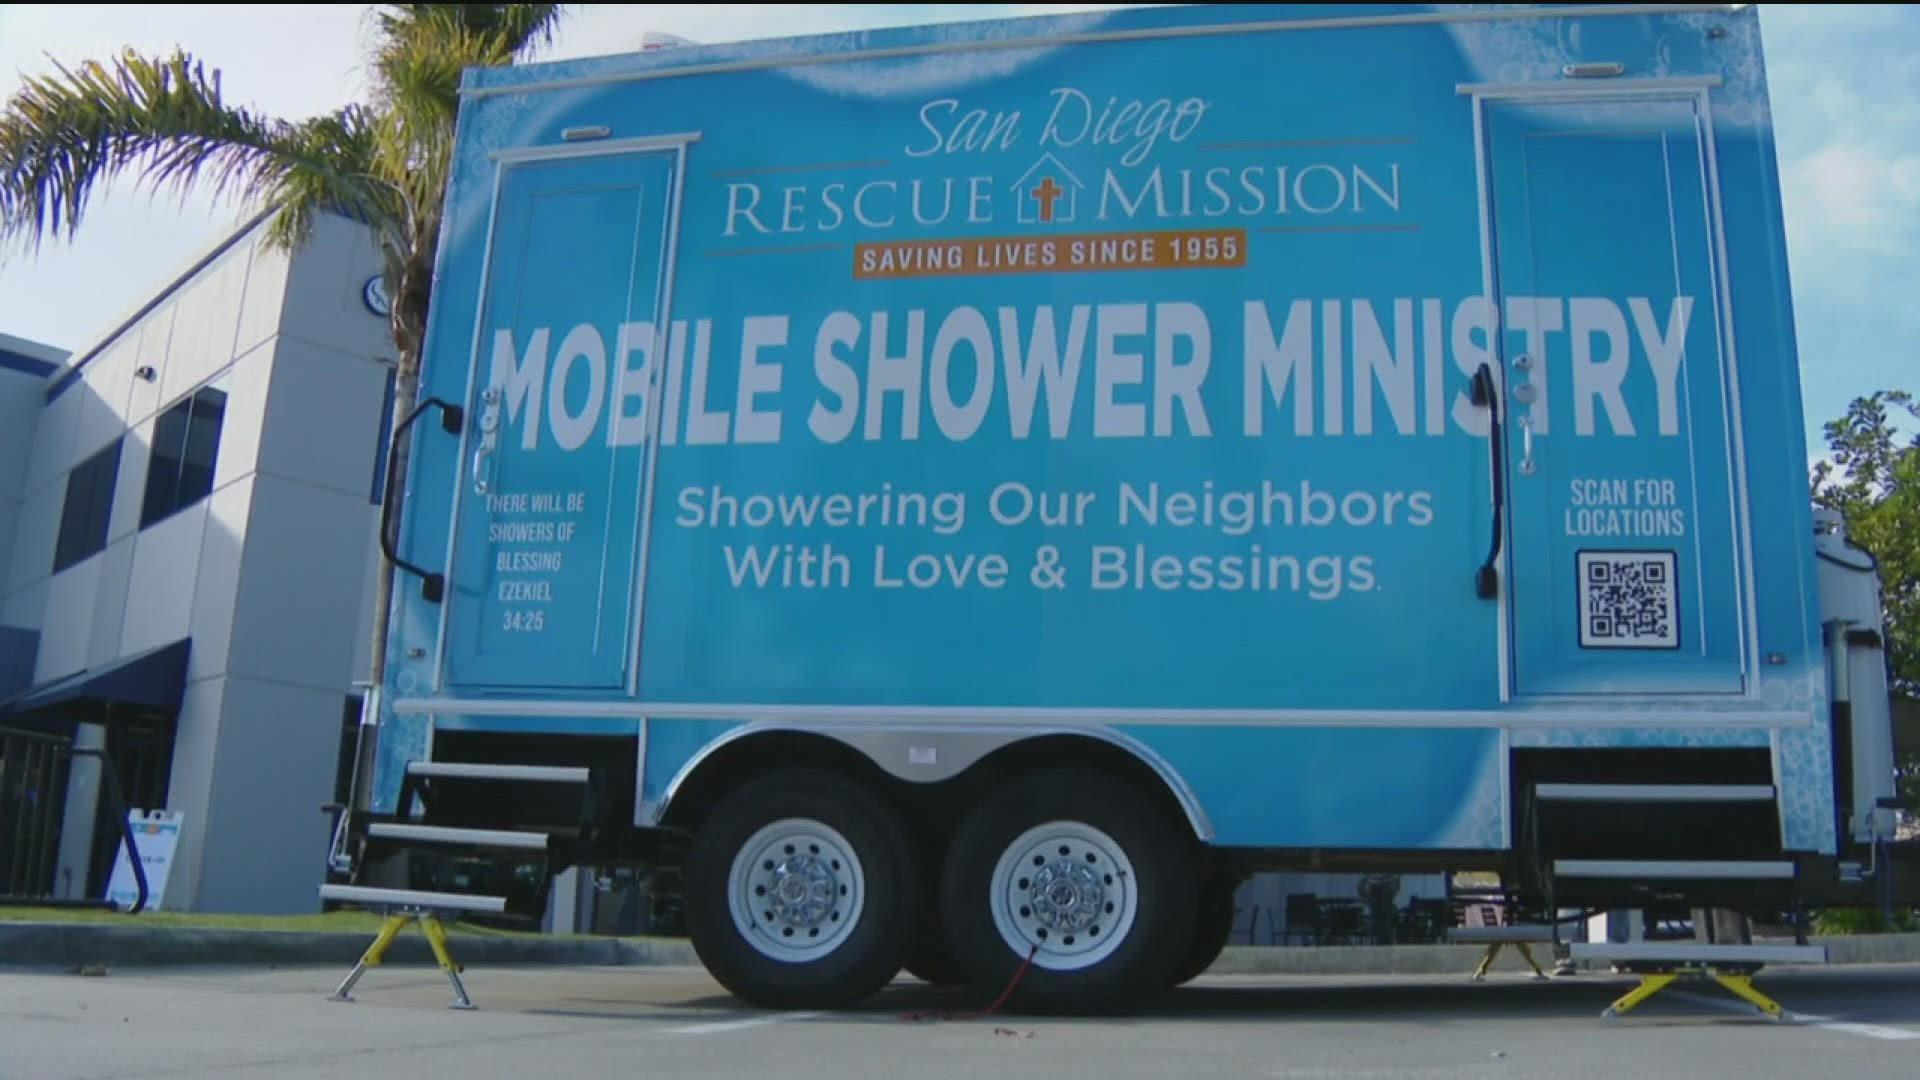 Homelessness in North County is rising and San Diego Rescue Mission is helping to provide a way to engage to help transition from the streets to a home.